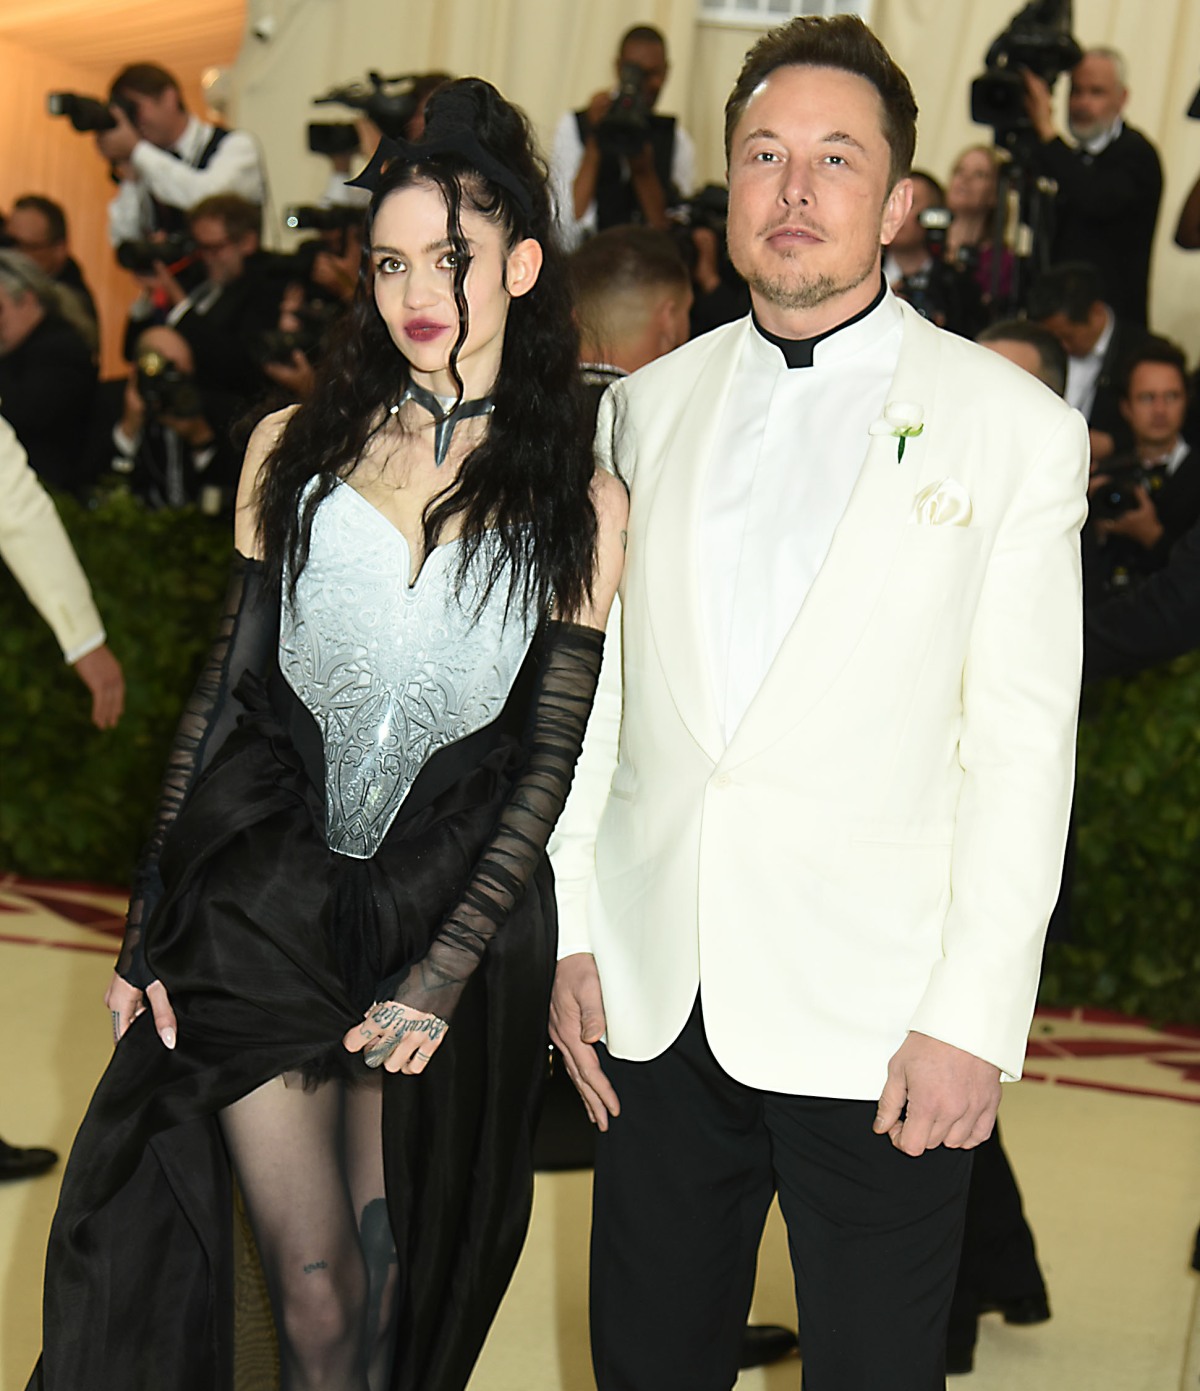 Grimes and Elon Musk at the Costume Institute Benefit at the Metropolitin Museum of Art at the opening of 'Heavenly Bodies: Fashion and the Catholic Imagination' in New York City